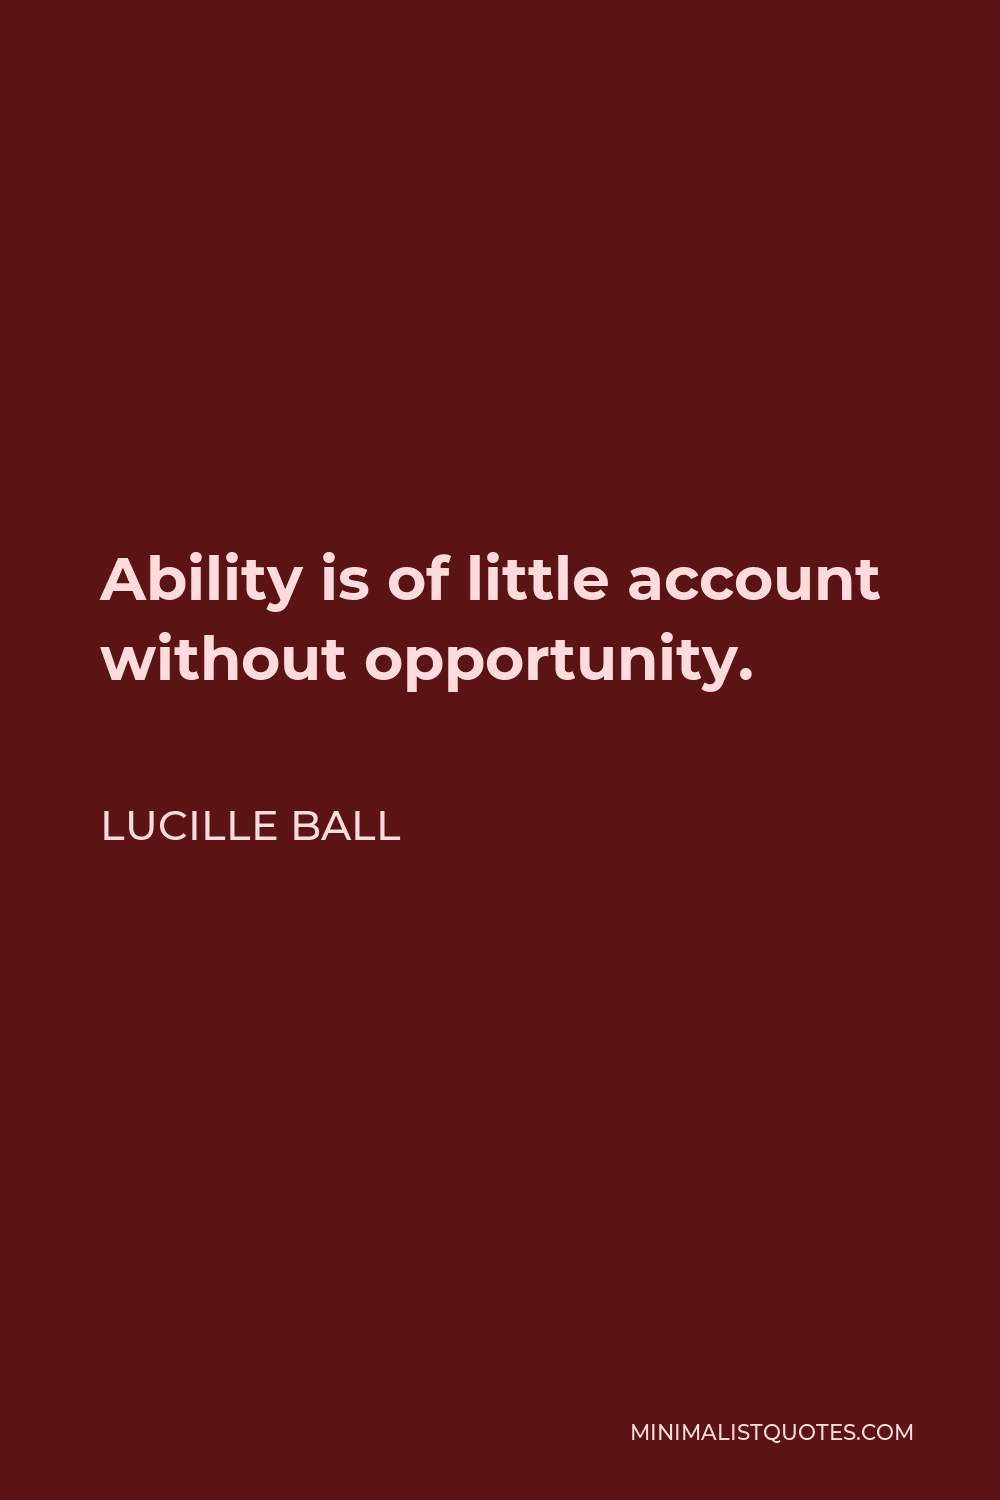 Lucille Ball Quote - Ability is of little account without opportunity.